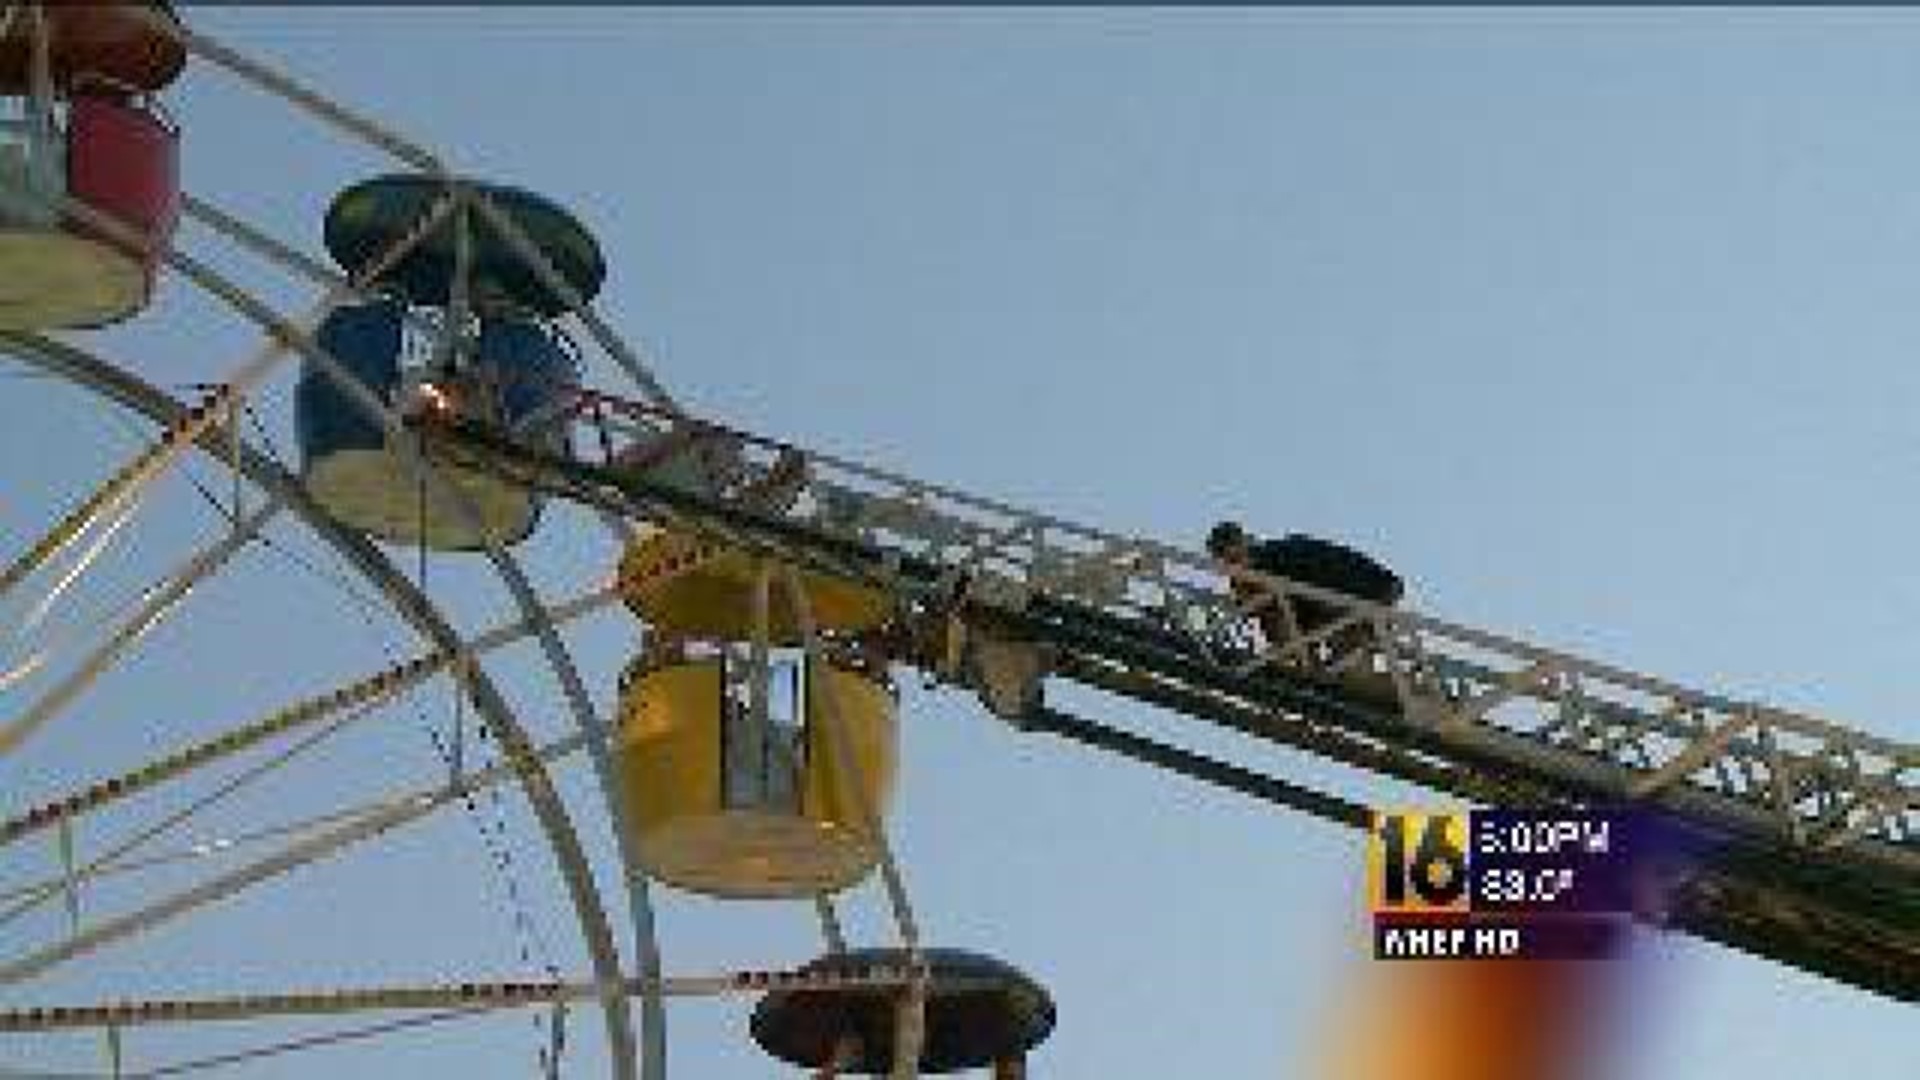 Inspections Planned after Ferris Wheel Malfunctions at Wyoming County Fair